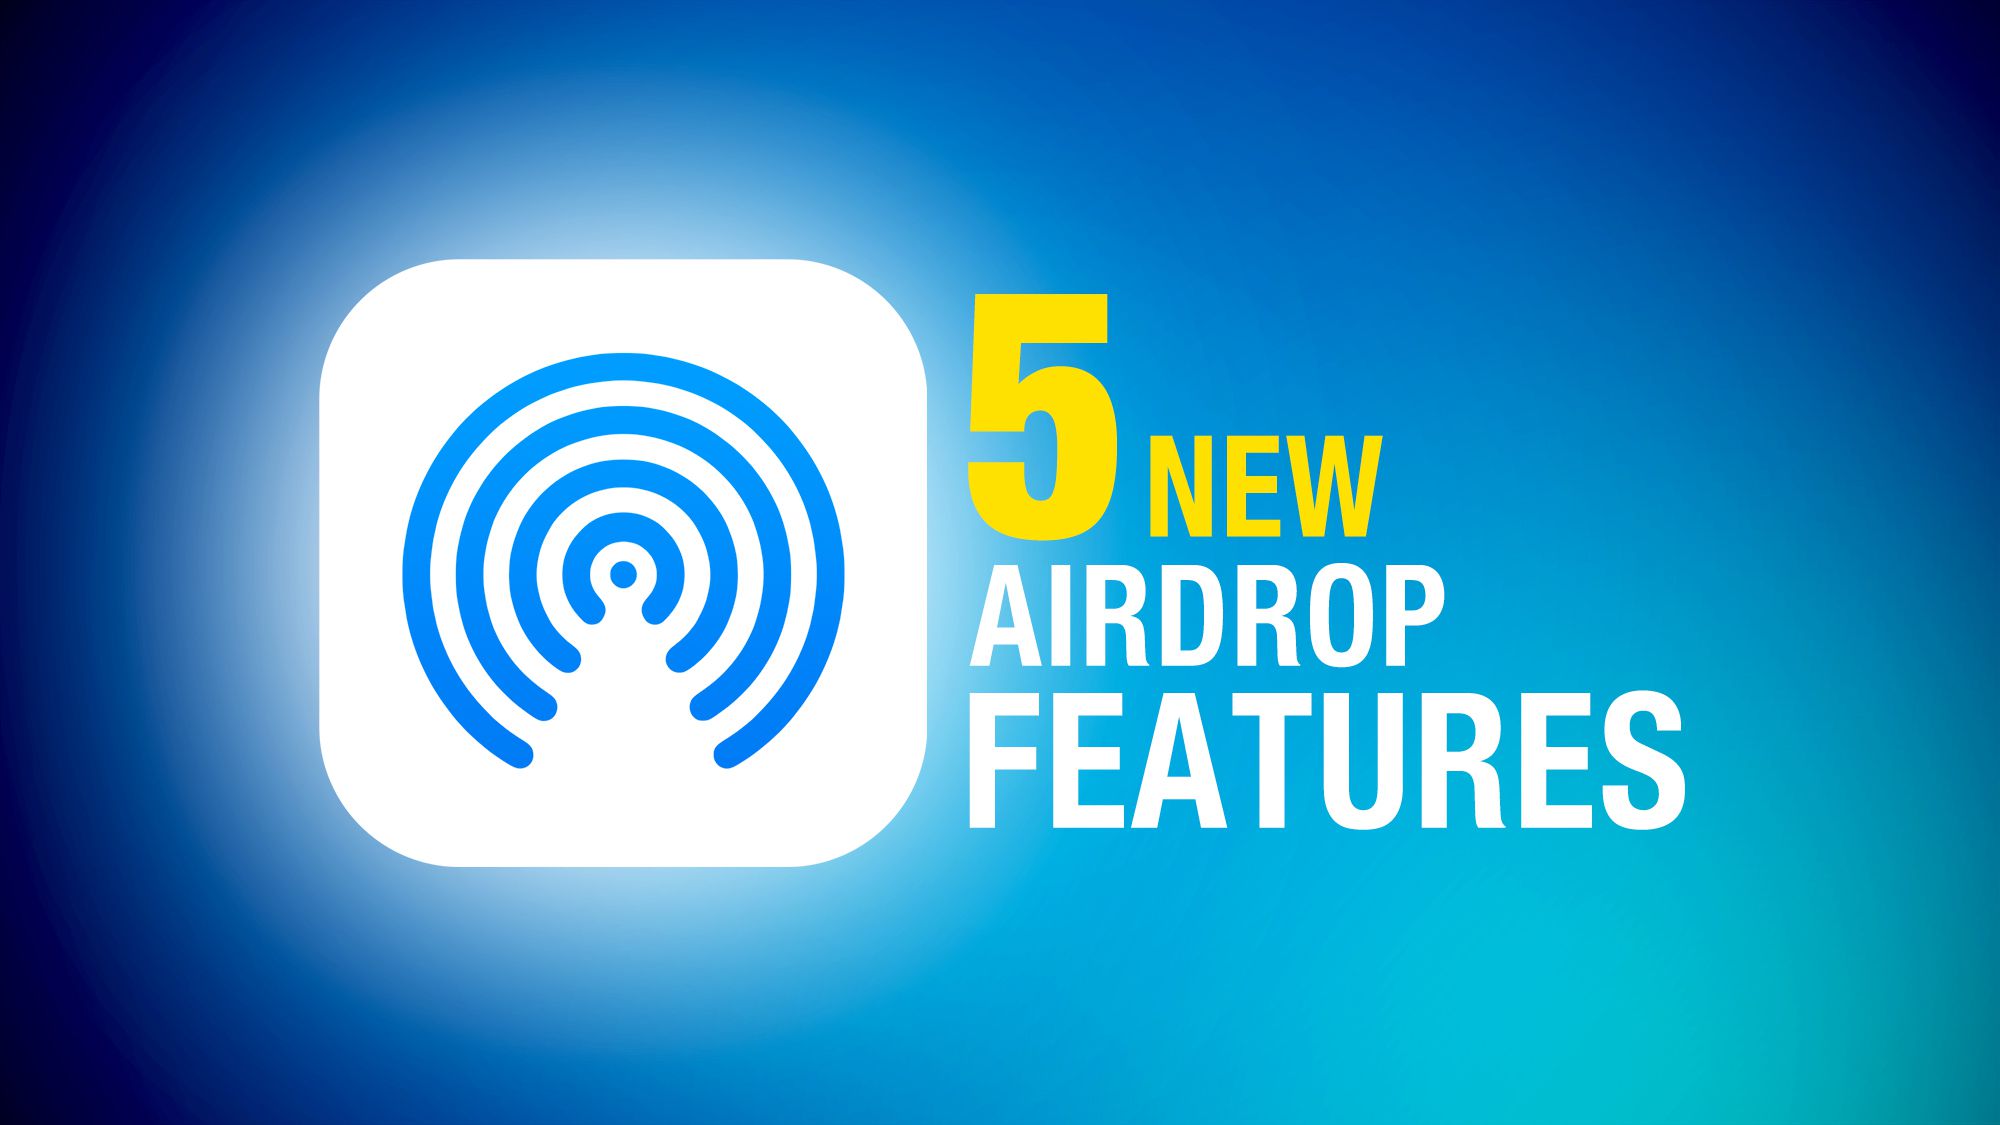 5 New AirDrop Features Feature.jpg